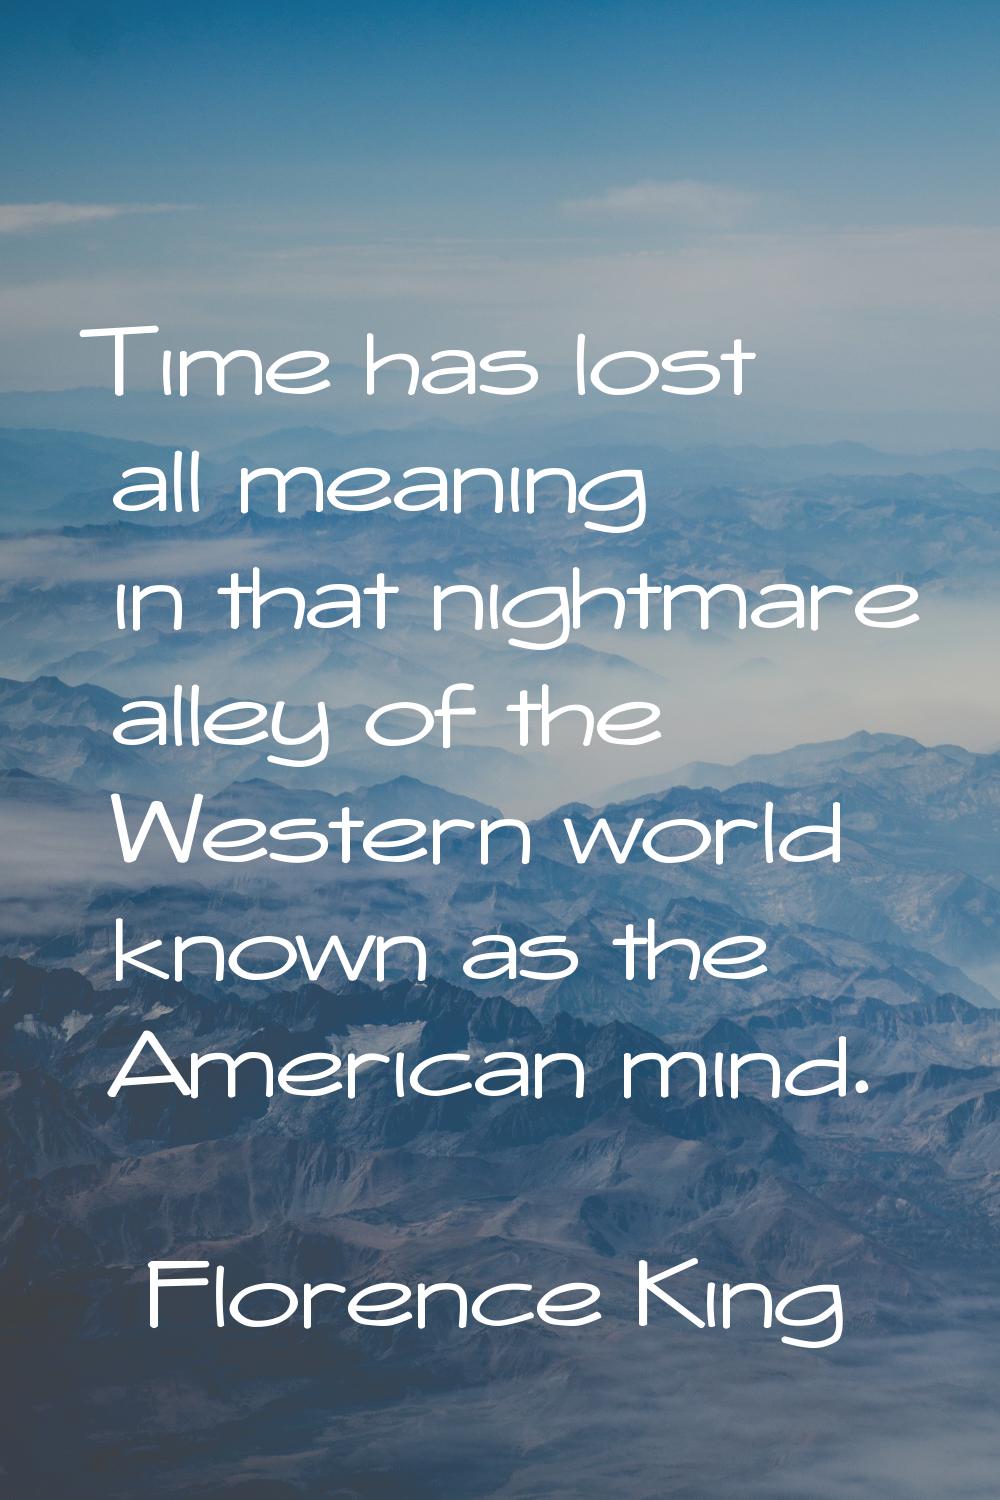 Time has lost all meaning in that nightmare alley of the Western world known as the American mind.